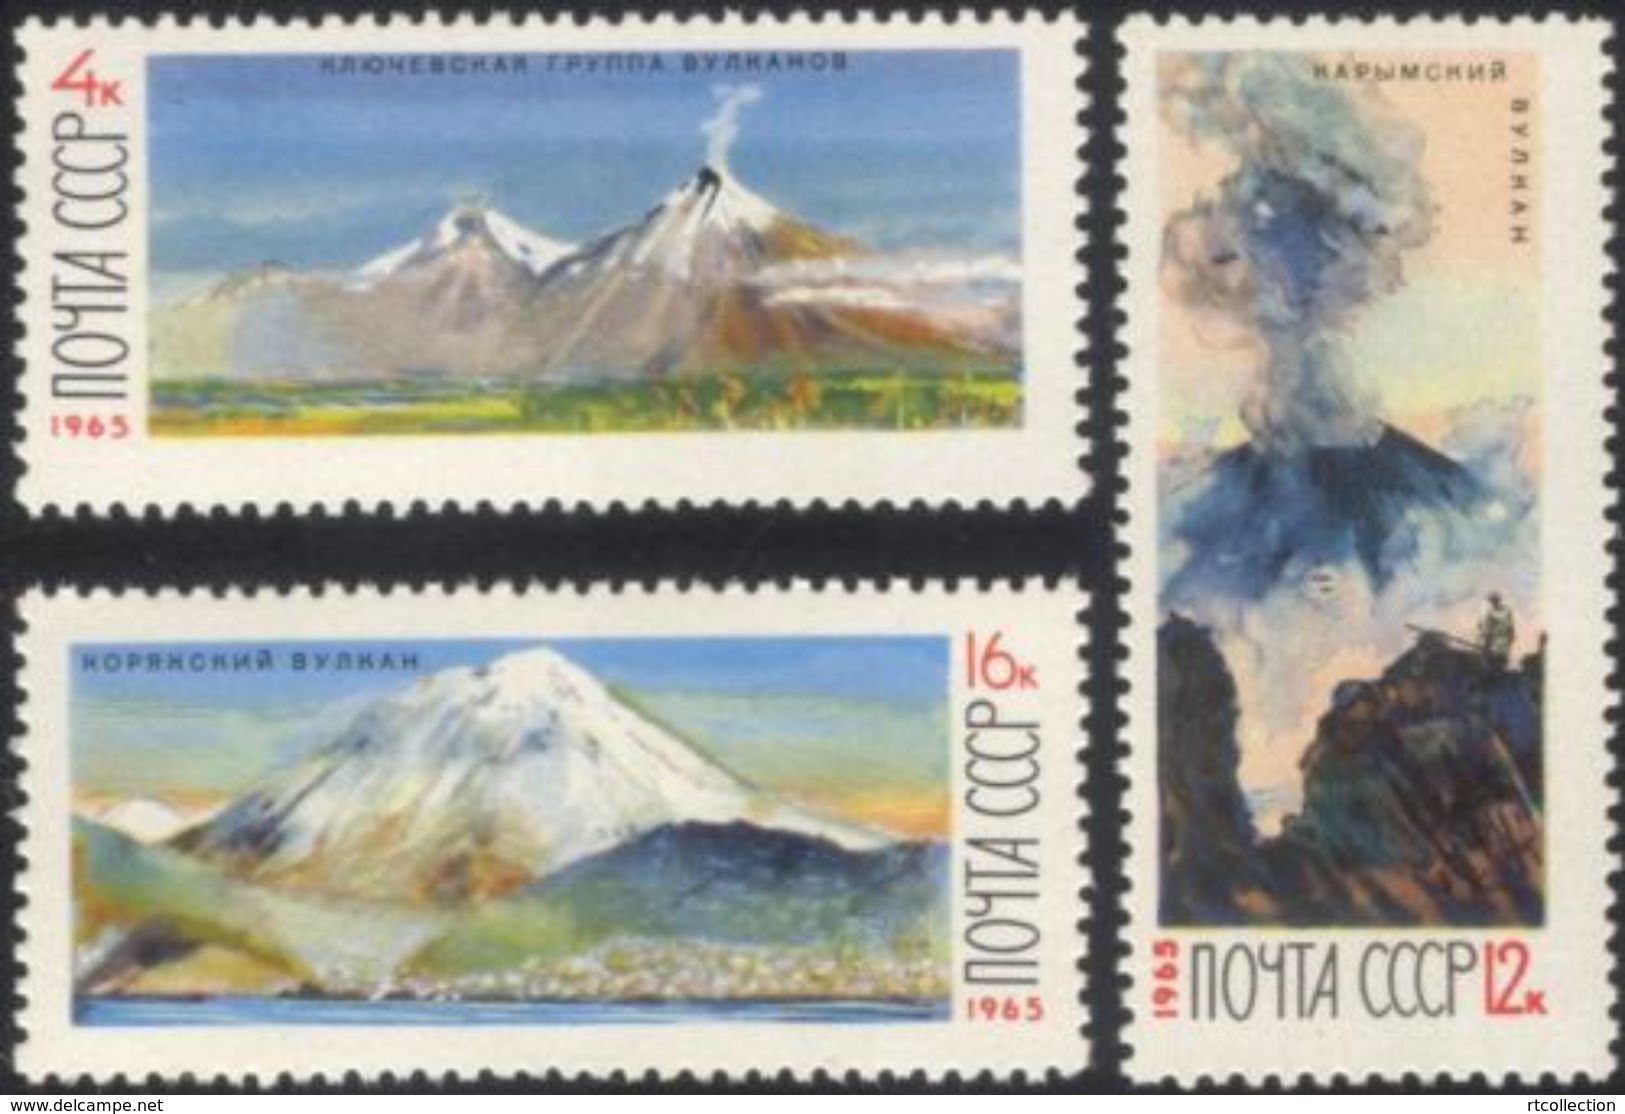 USSR Russia 1965 Volcanos Of Kamchatka Nature Kluchevsky Volcano Geology Geography Places Stamps MNH Michel 3138-3140 - Vulkane